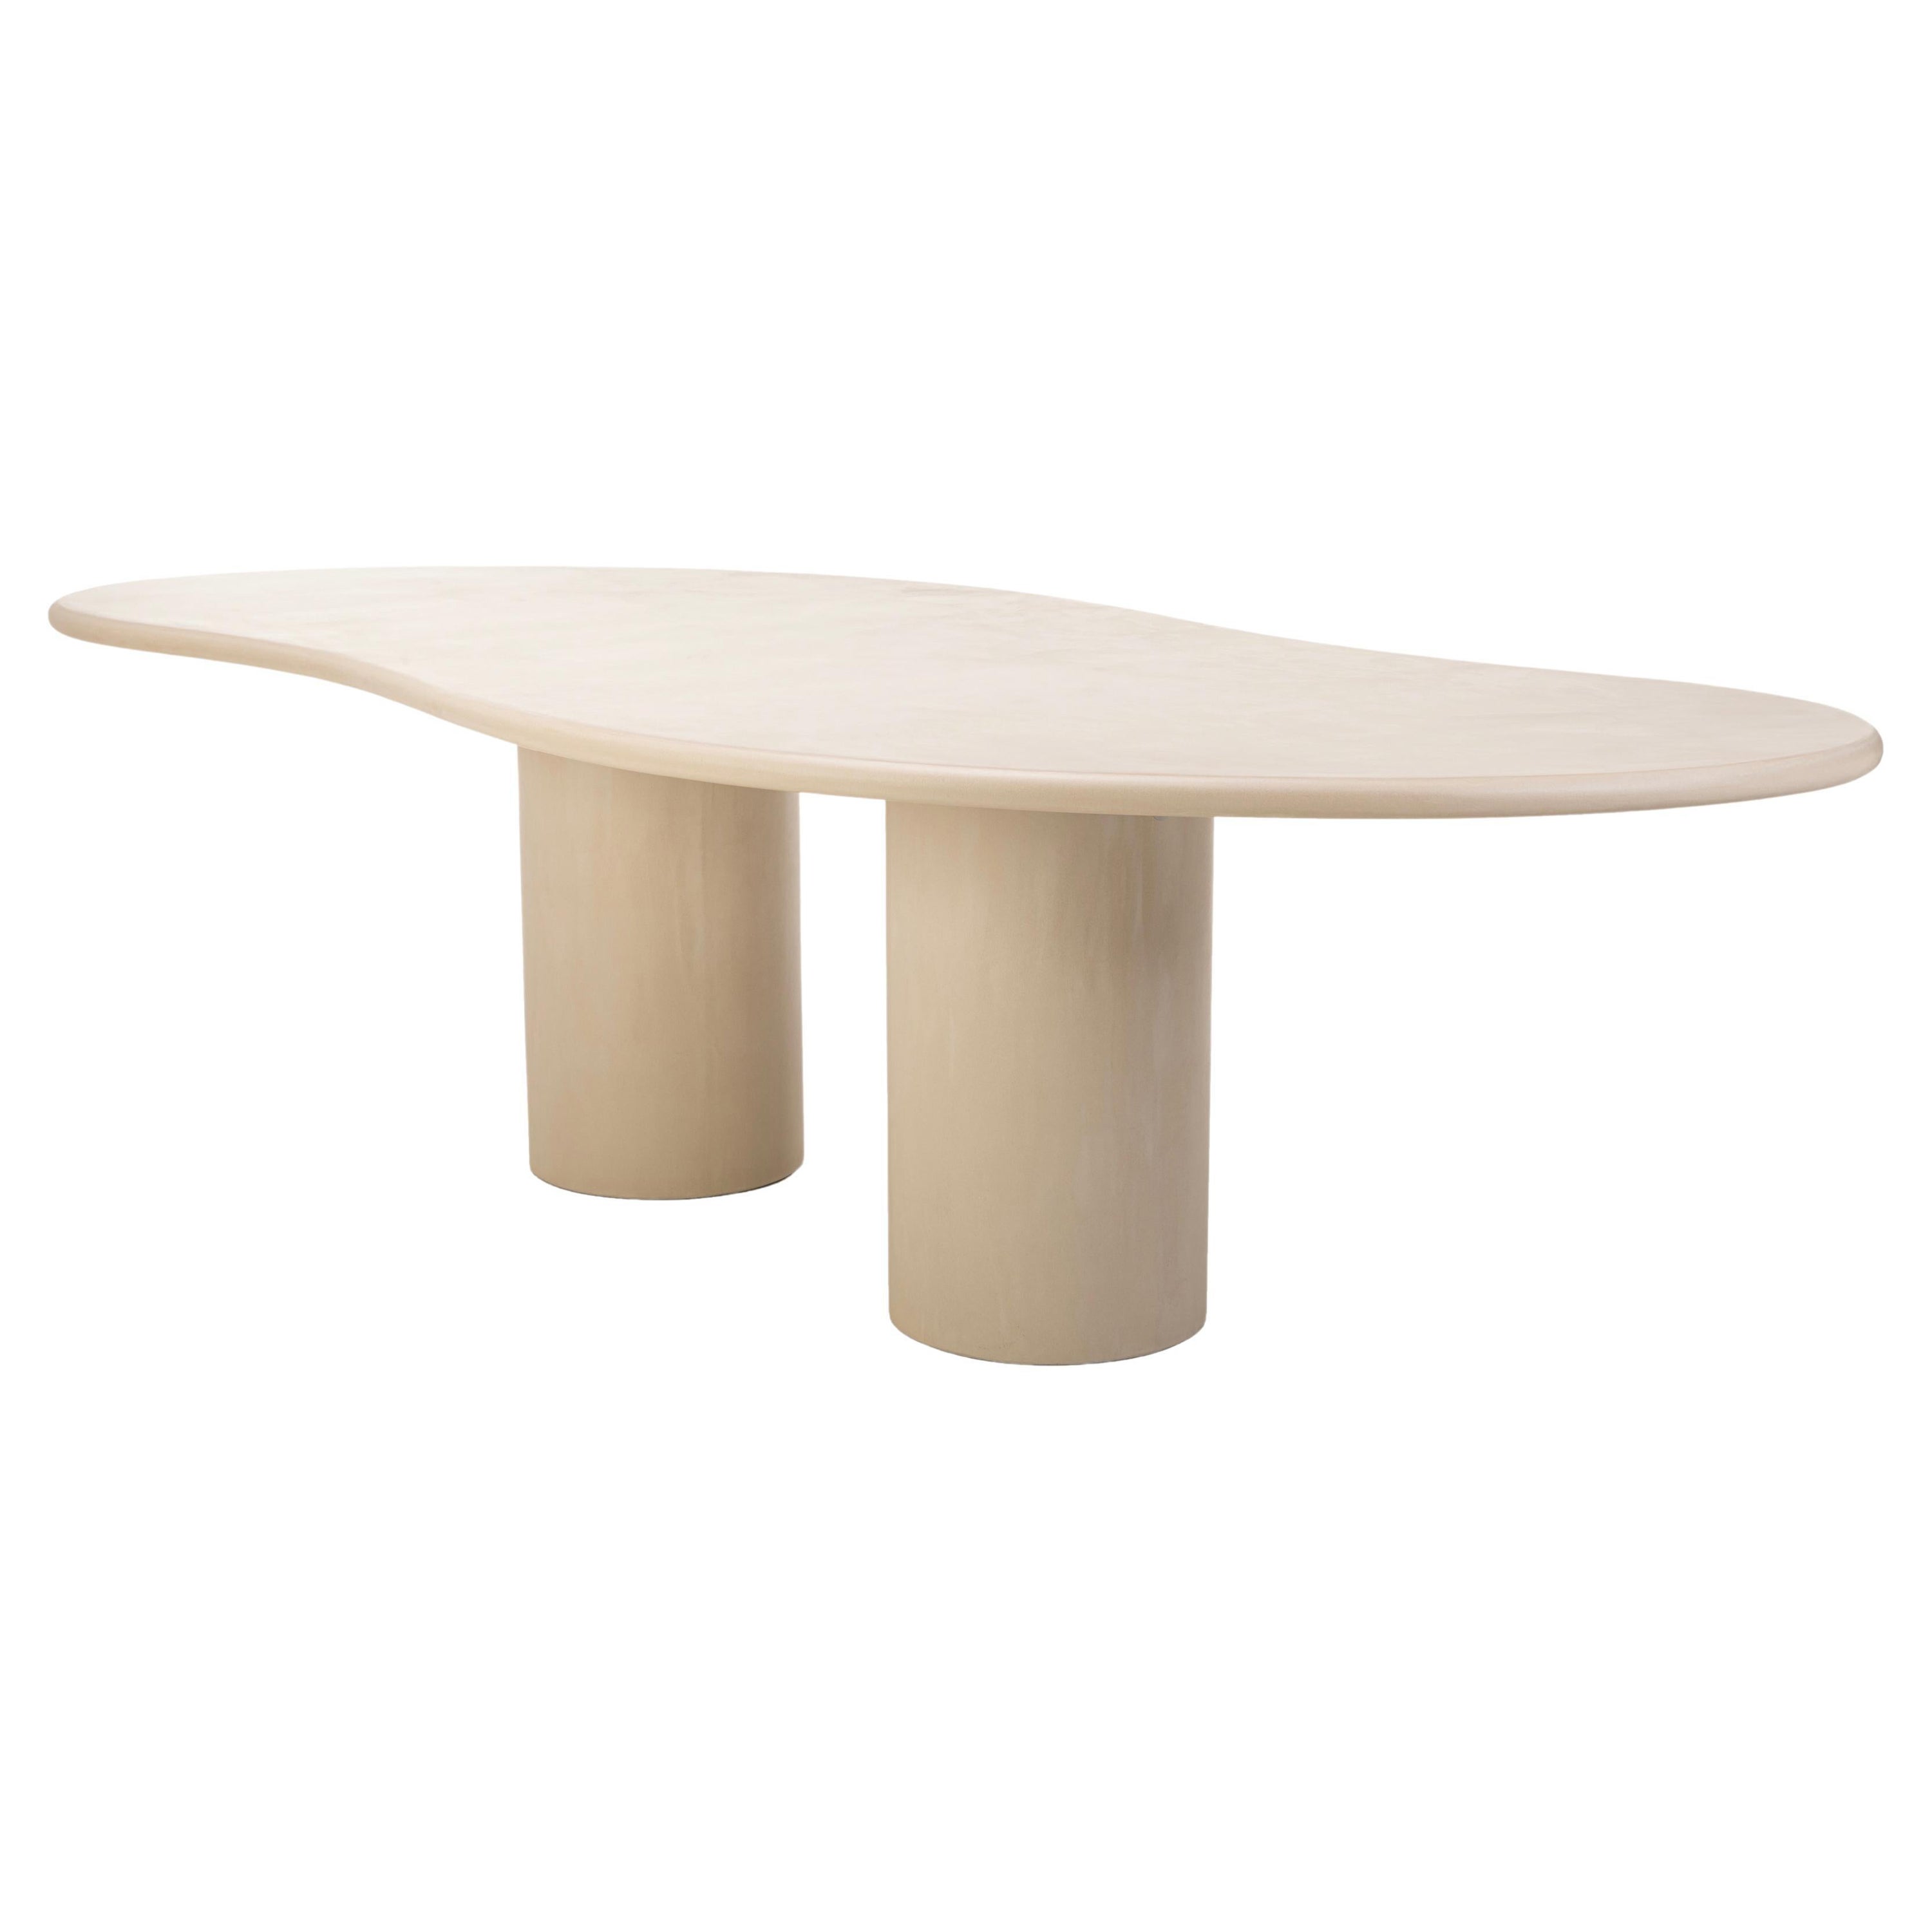 Natural Plaster Dining Table "Latus" 260 by Isabelle Beaumont For Sale